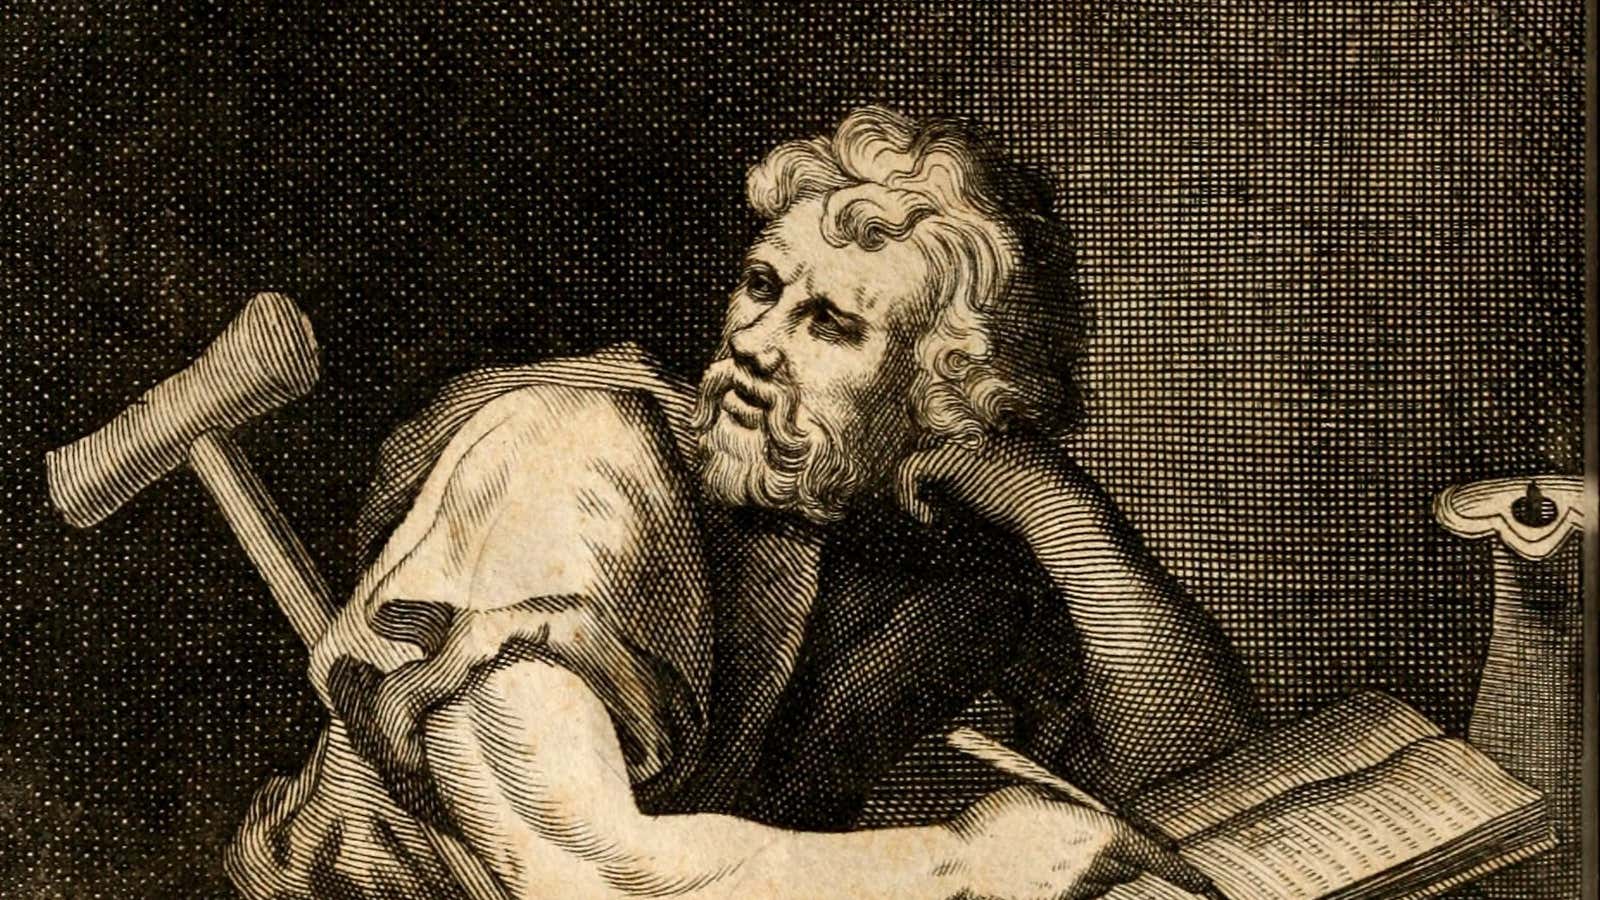 The philosophy of Stoic philosopher Epictetus, who lived as a slave, has inspired those in Silicon Valley.